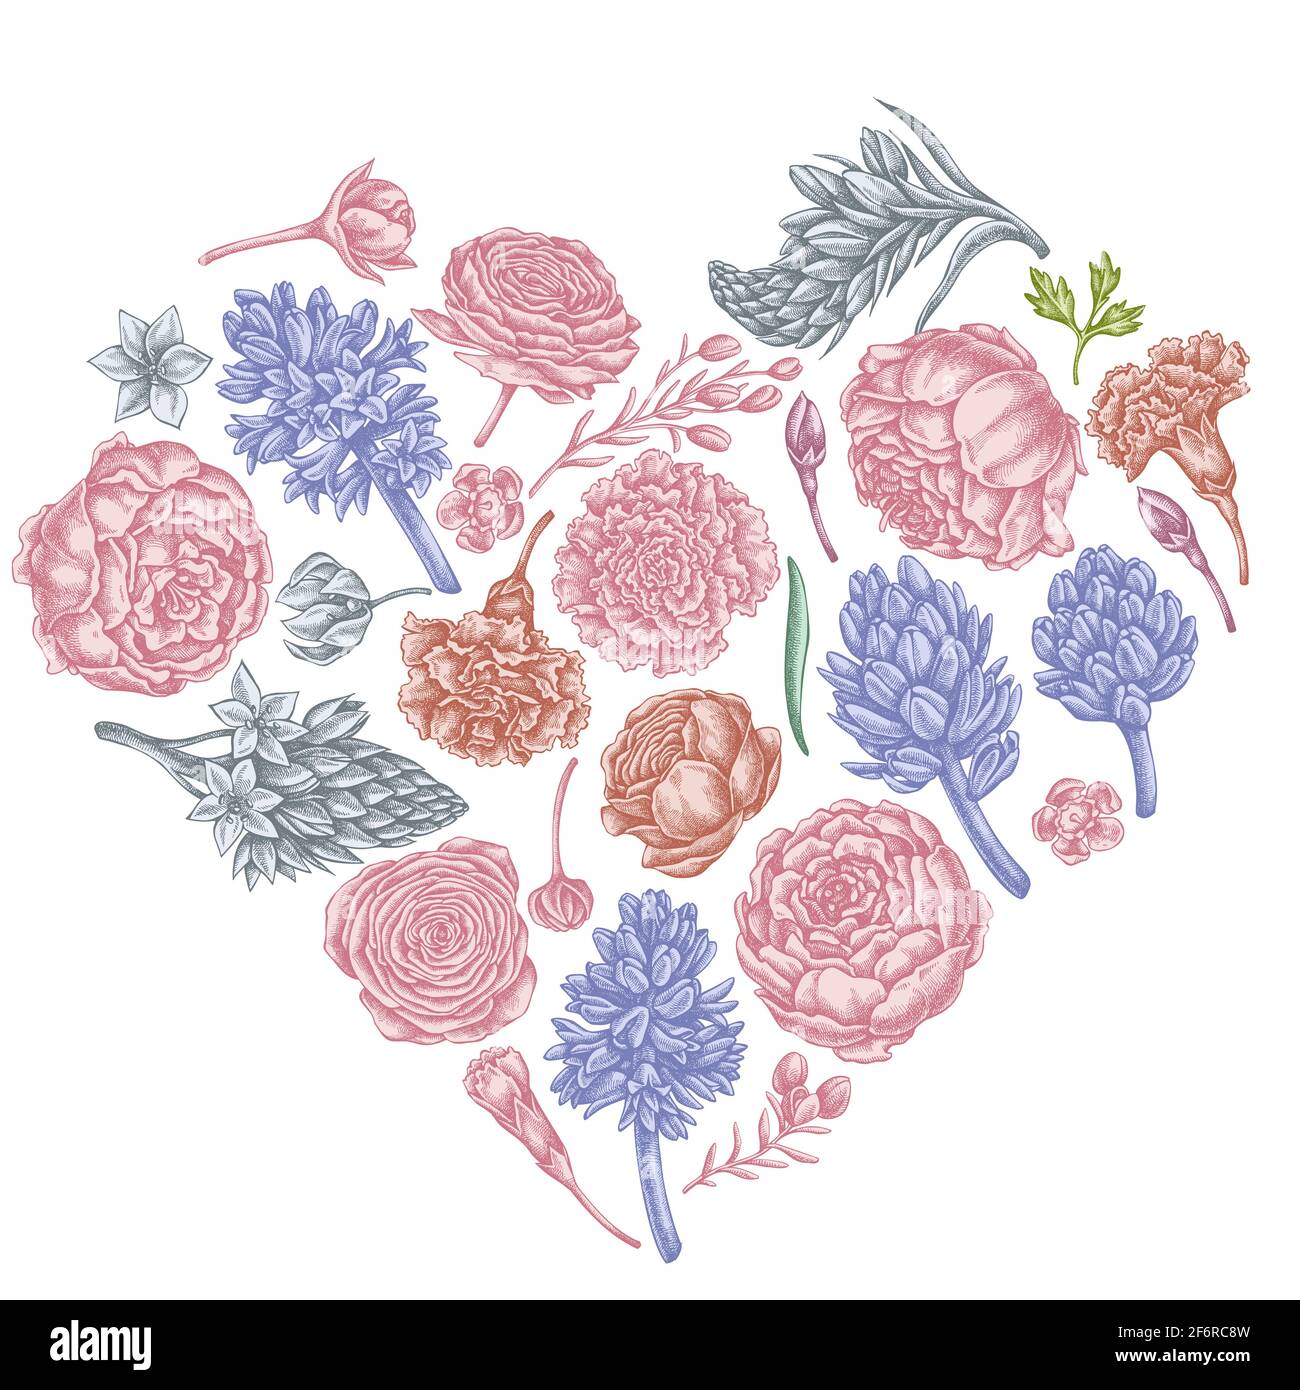 Heart floral design with pastel peony, carnation, ranunculus, wax flower, ornithogalum, hyacinth Stock Vector